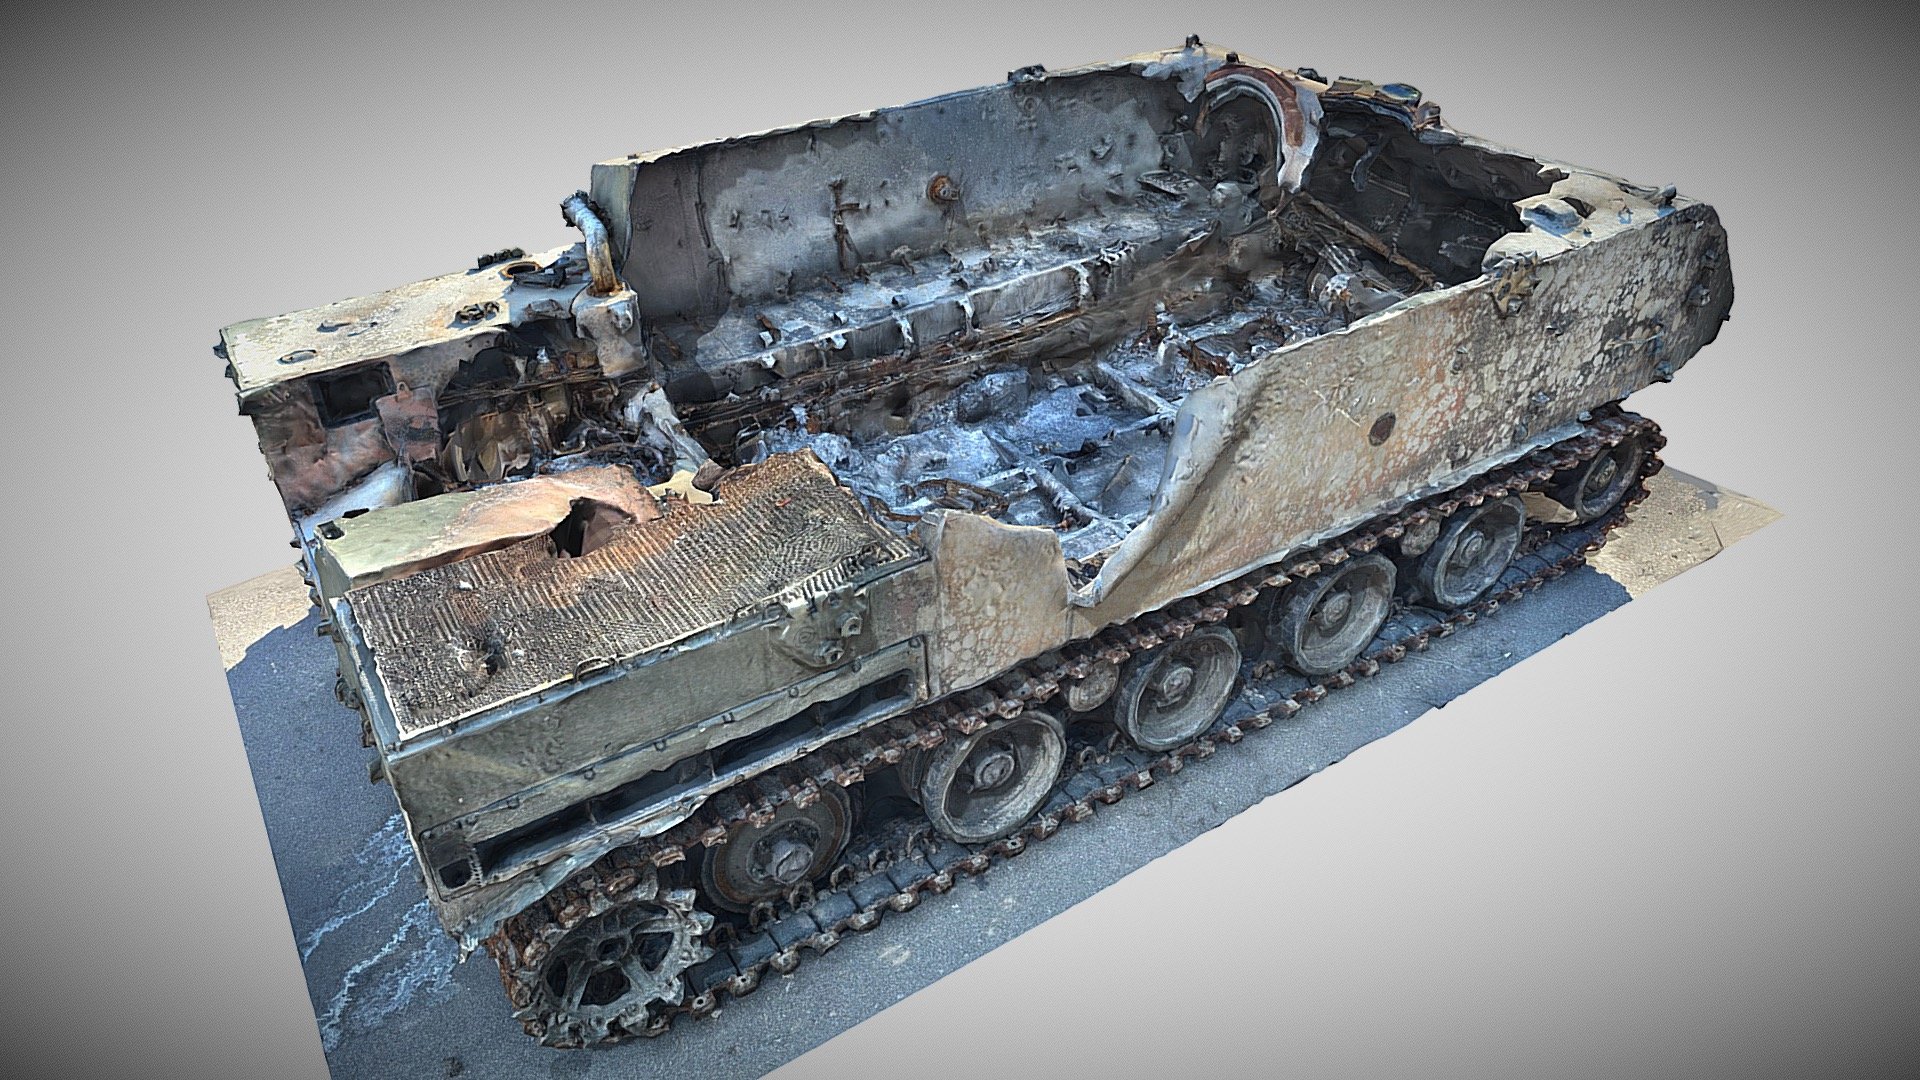 Destroyed russian military vehicles war crimes amid Russia's invasion.
As a part of the project #Standby Ukraine for saving and digitization heritage  in Ukraine and evidence of russian crime in Ukraine. 
The project has been launched of the team work of TOP PROJECT company and volunteers. Project coordinator, head of the company and 3D imaging scan by Vlad Tiunov 🇺🇦, 3D computing and texturing by Vitaly Yevsovich 🇺🇦, managing partner of the project Diana Hrynyuk 🇺🇦 - Destroyed russian military vehicles 3d model